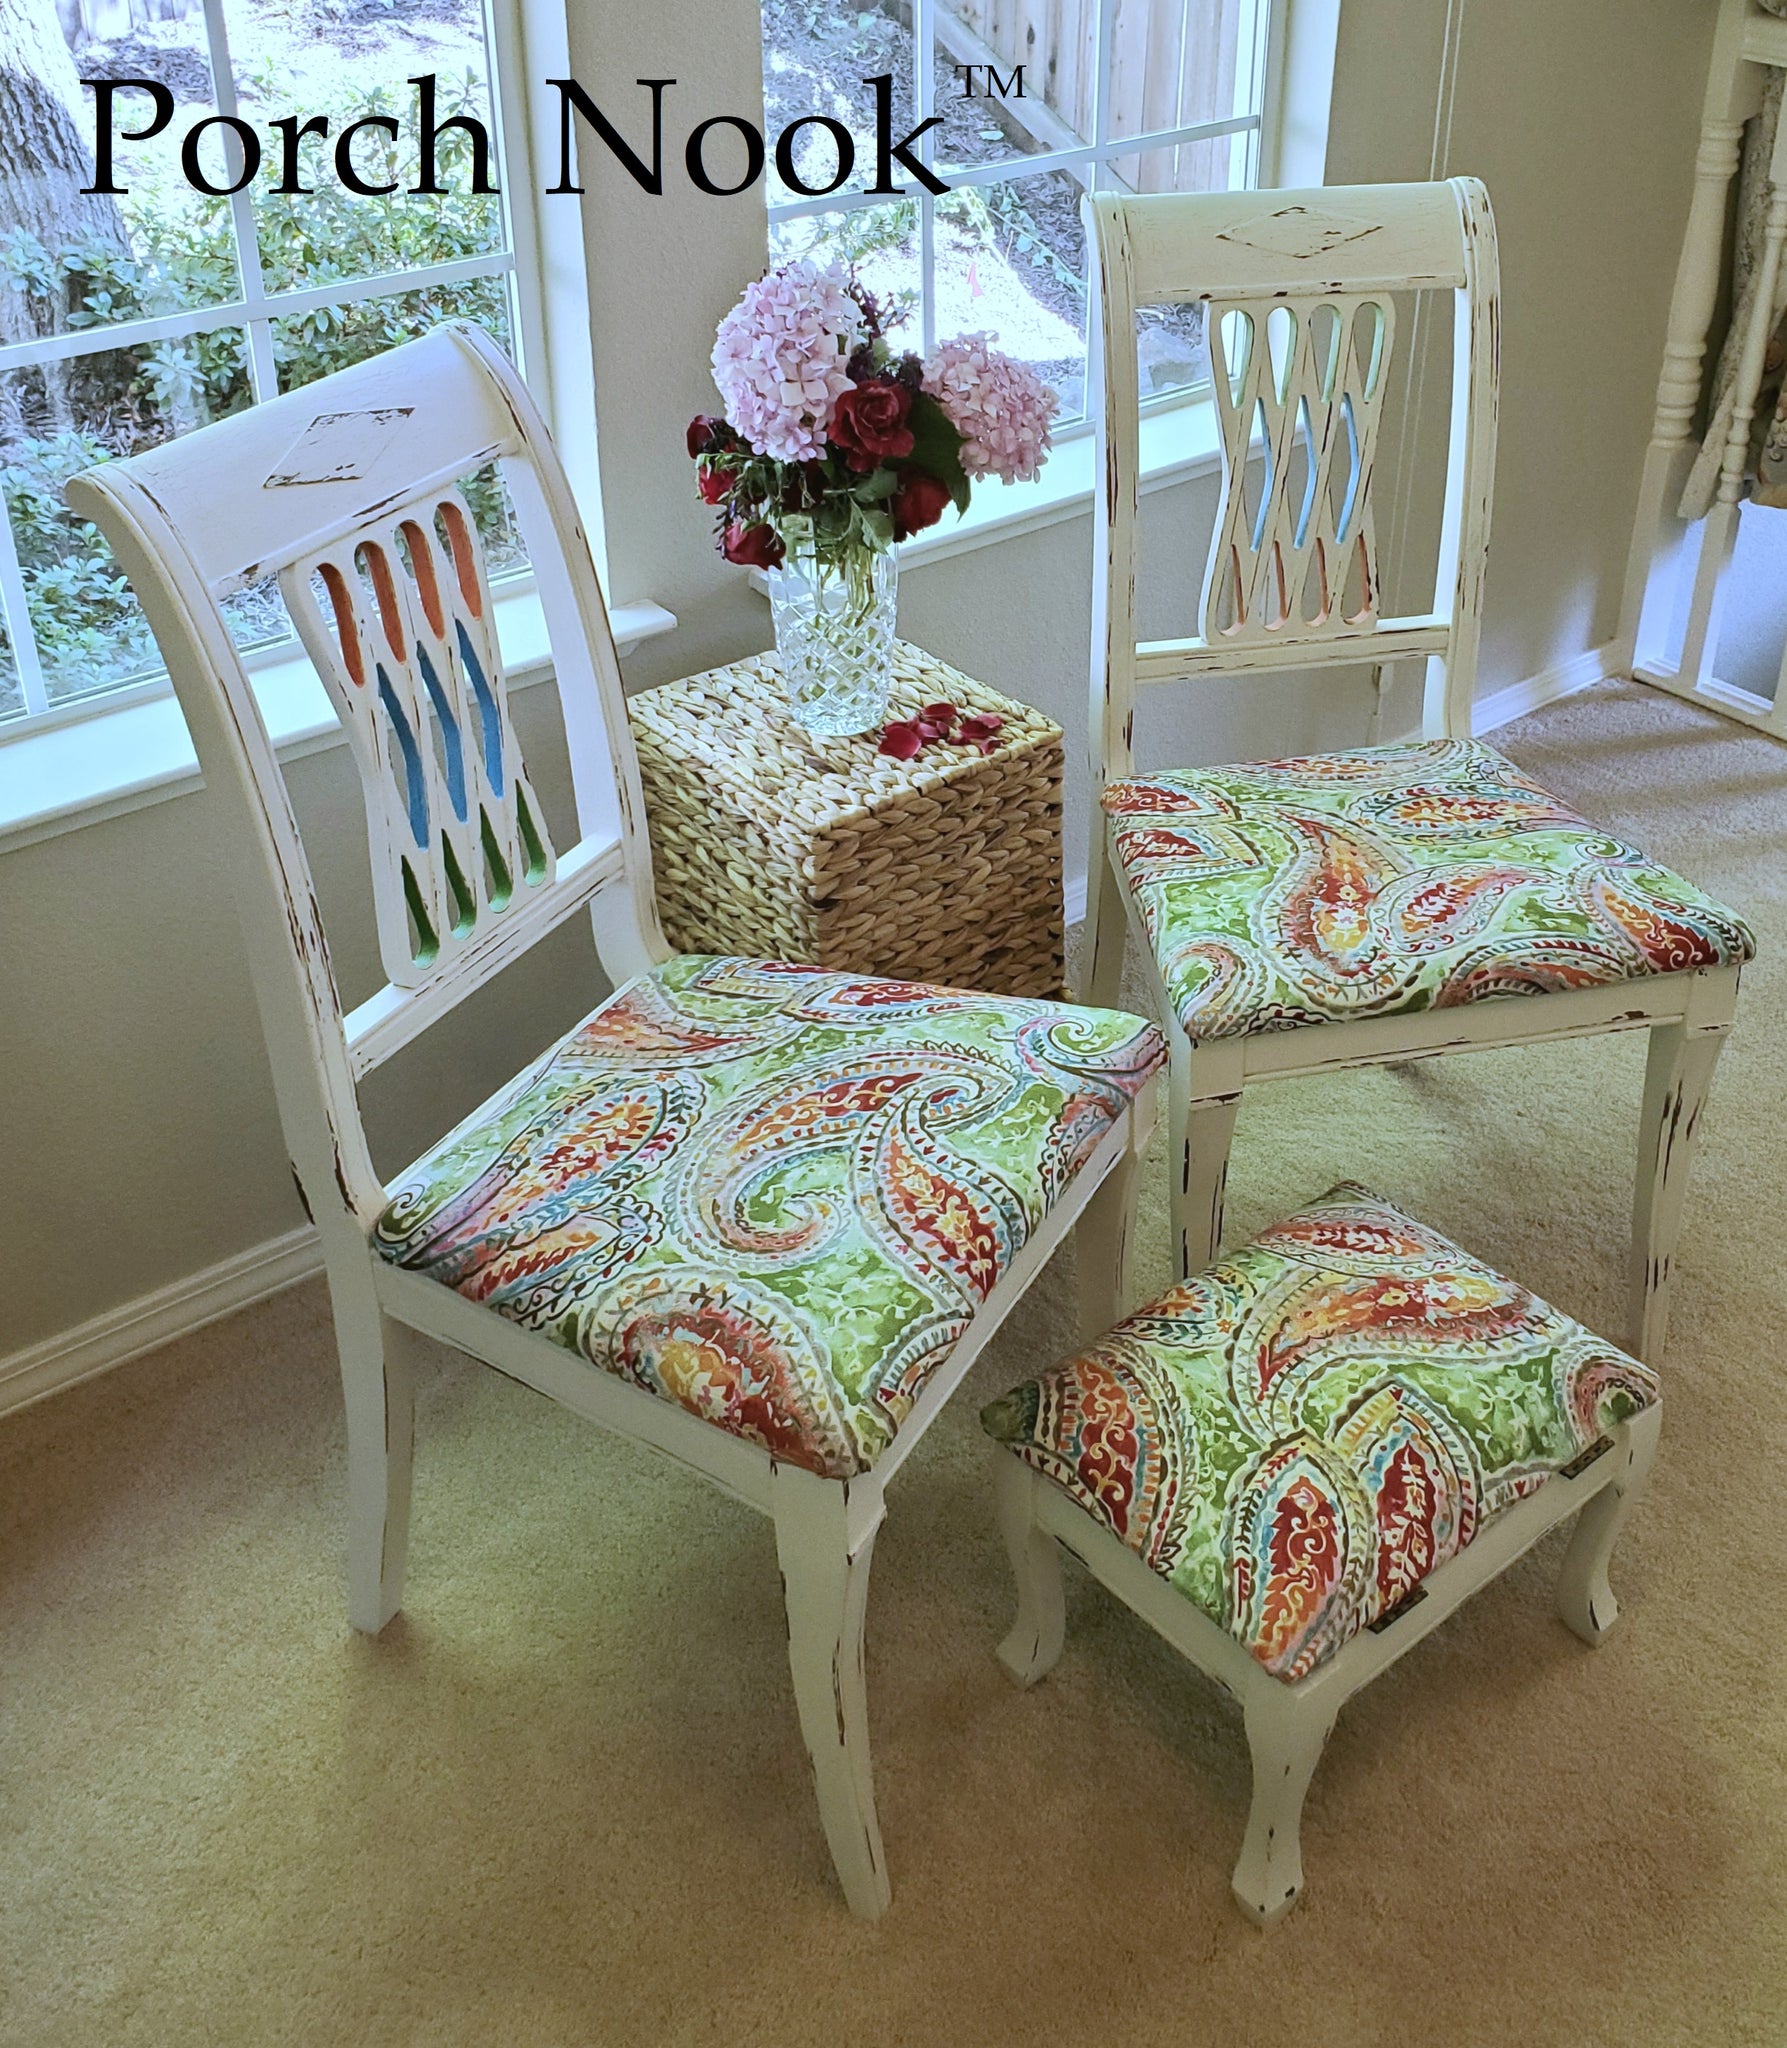 Porch Nook  Heirloom Tomato Furniture Paint by Porch Nook